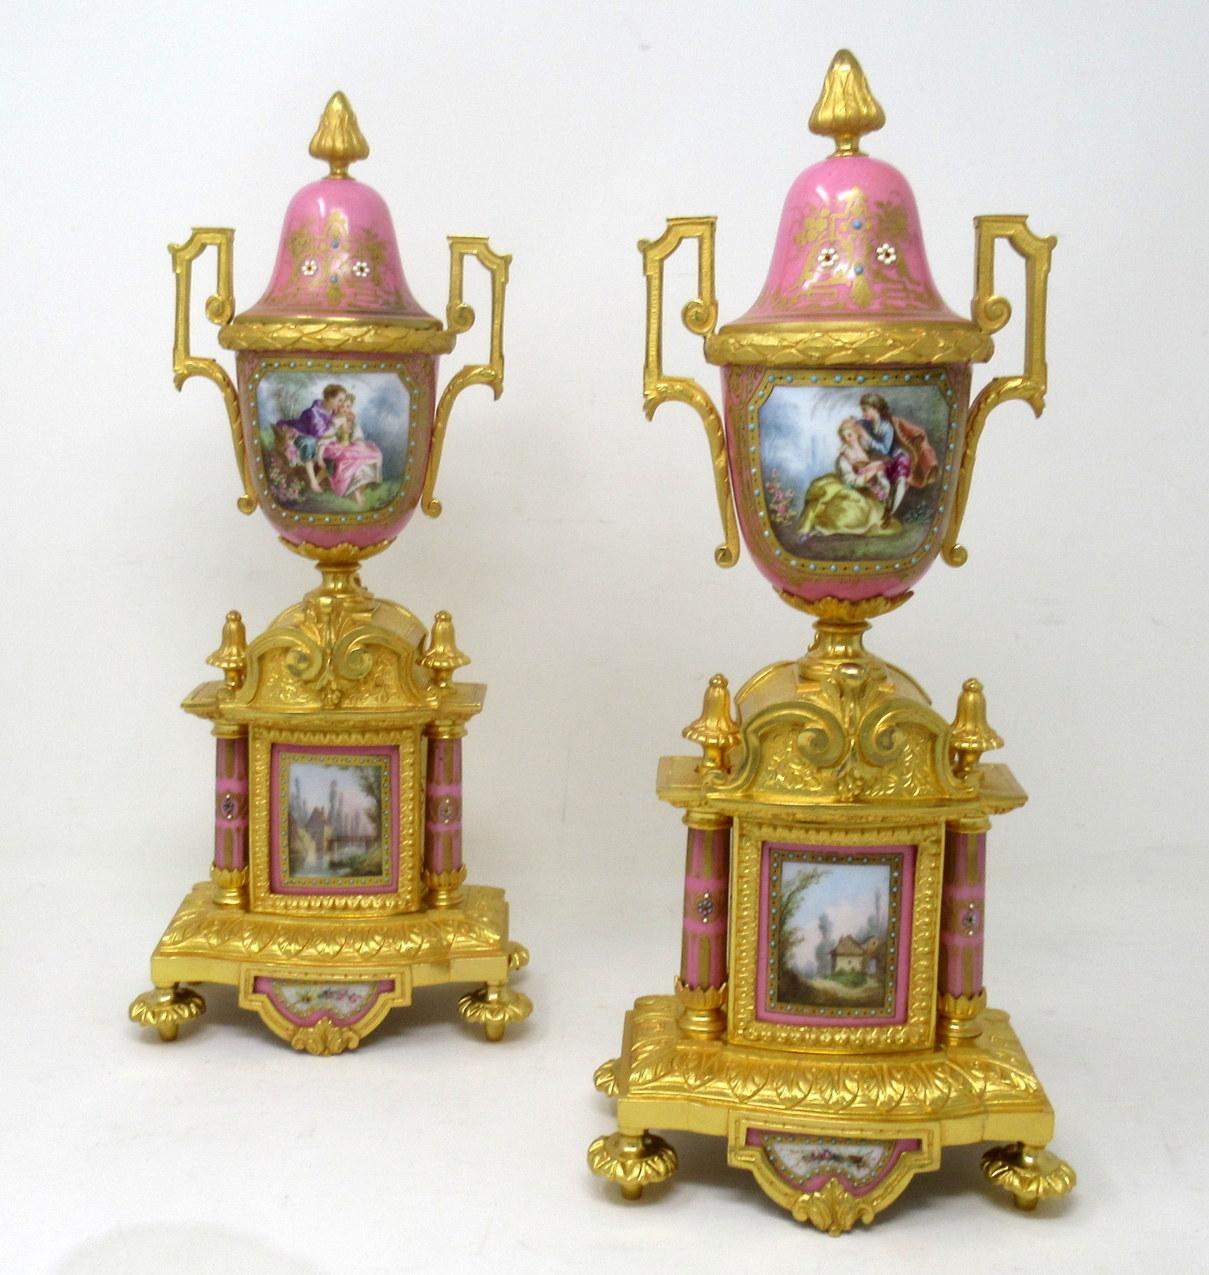 Stunning Pair French Sevres Soft Paste Hand Decorated Pompadour Pink Porcelain and Ormolu Twin Scroll Handle Table or Mantle Urns of traditional form and of outstanding quality, made during the last half of the Nineteenth Century. 

Each urn of